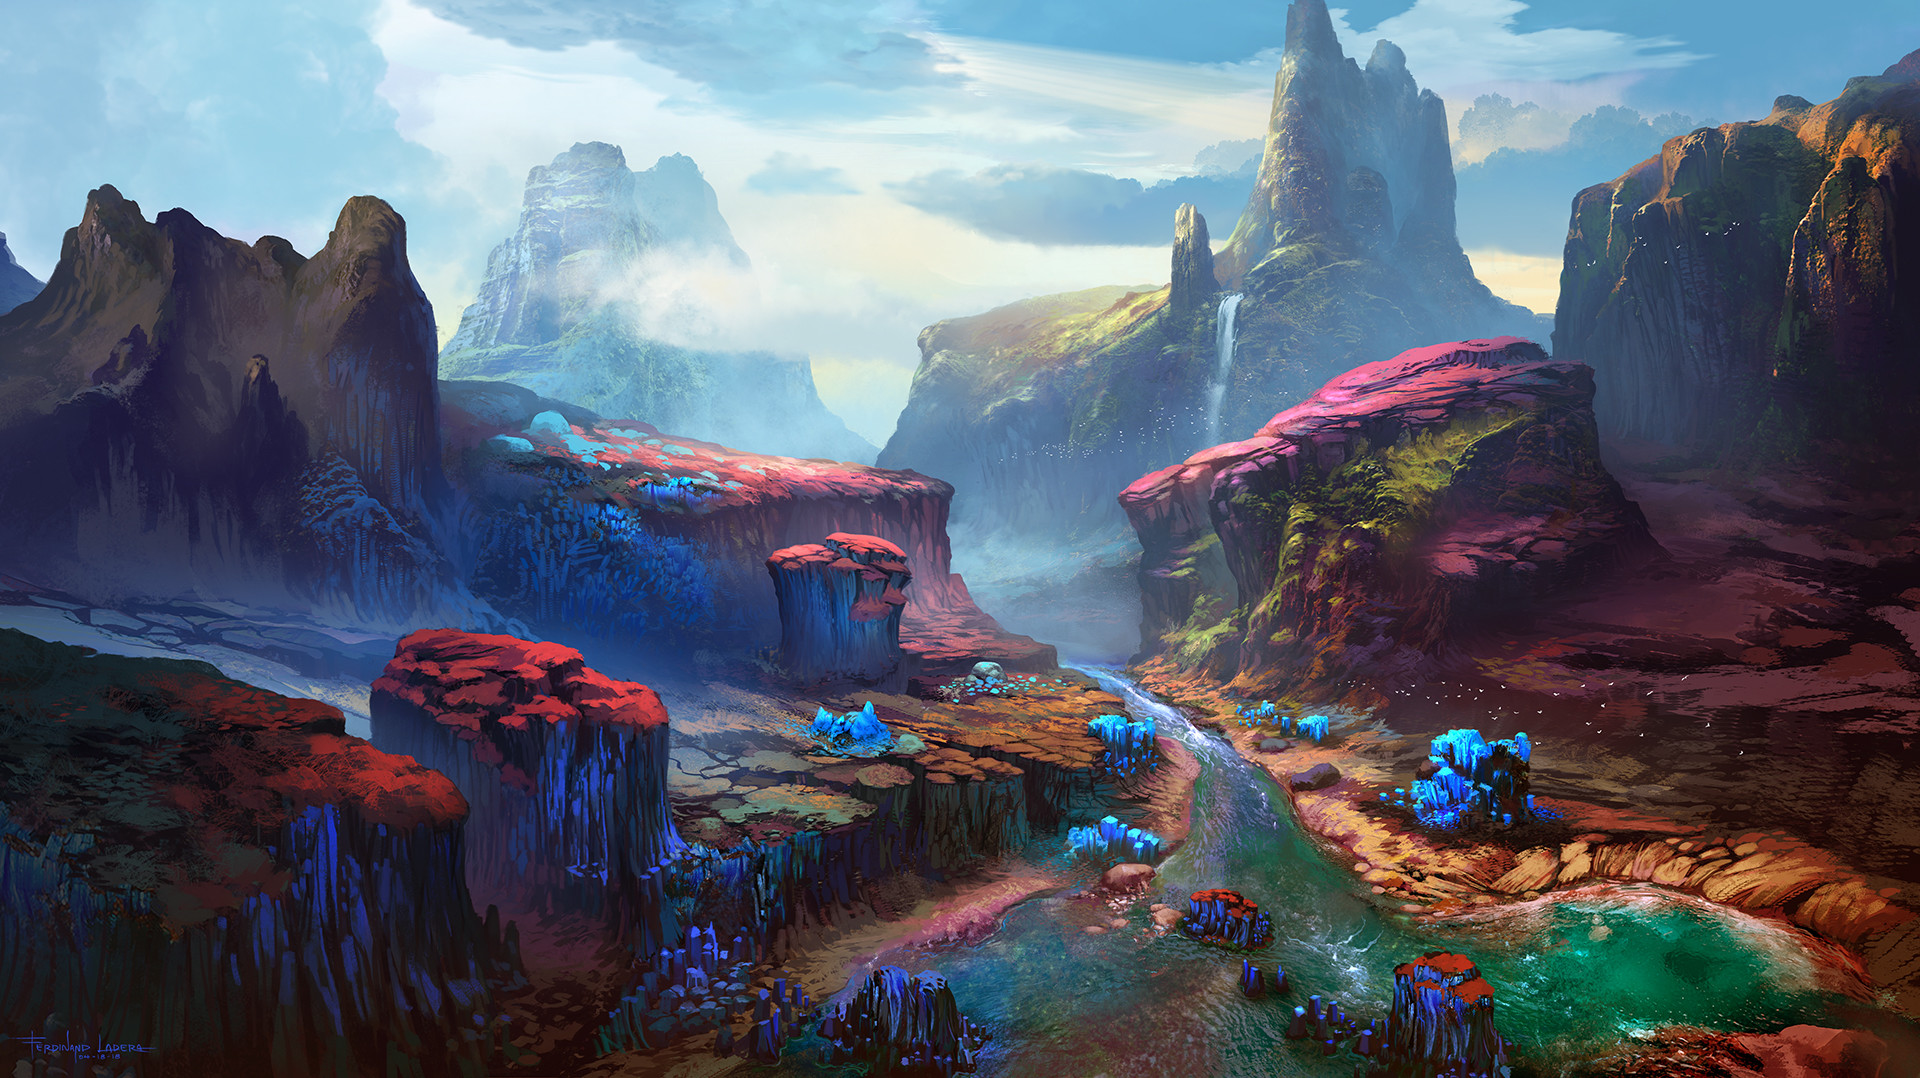 Fantasy landscape concepts that are awe inspiring forever.